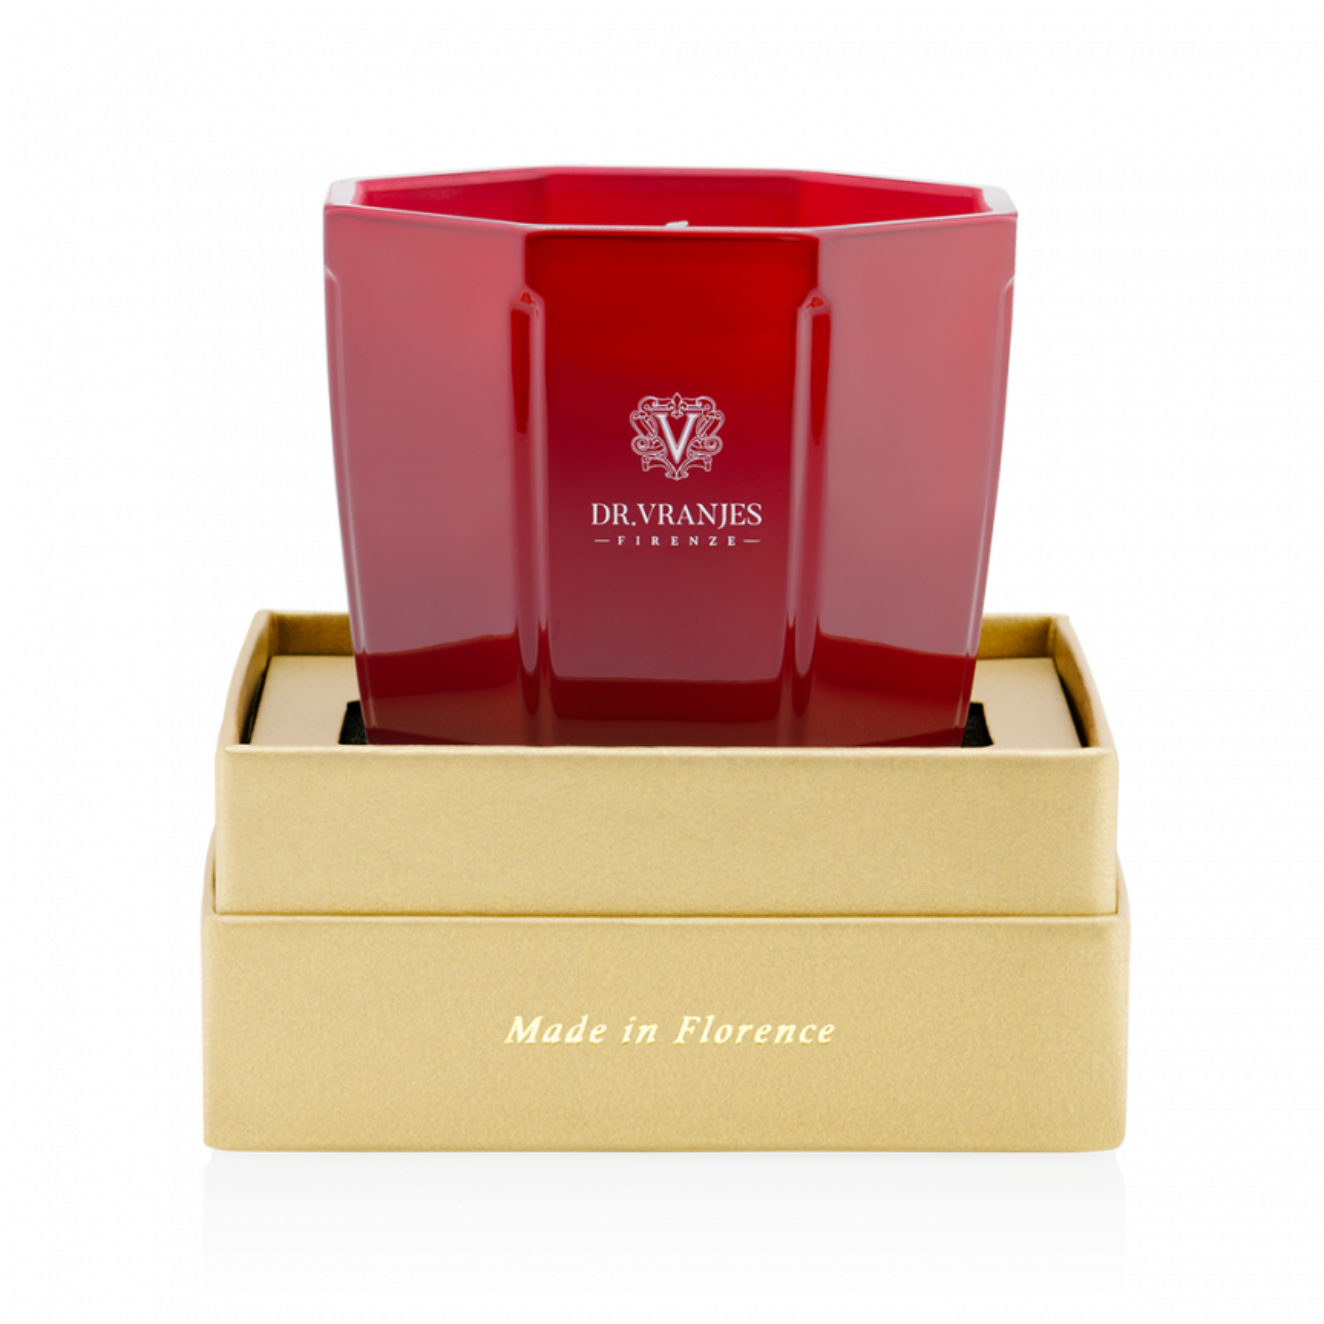 Special Edition Gifts Set - Rosso Nobile 200g candle